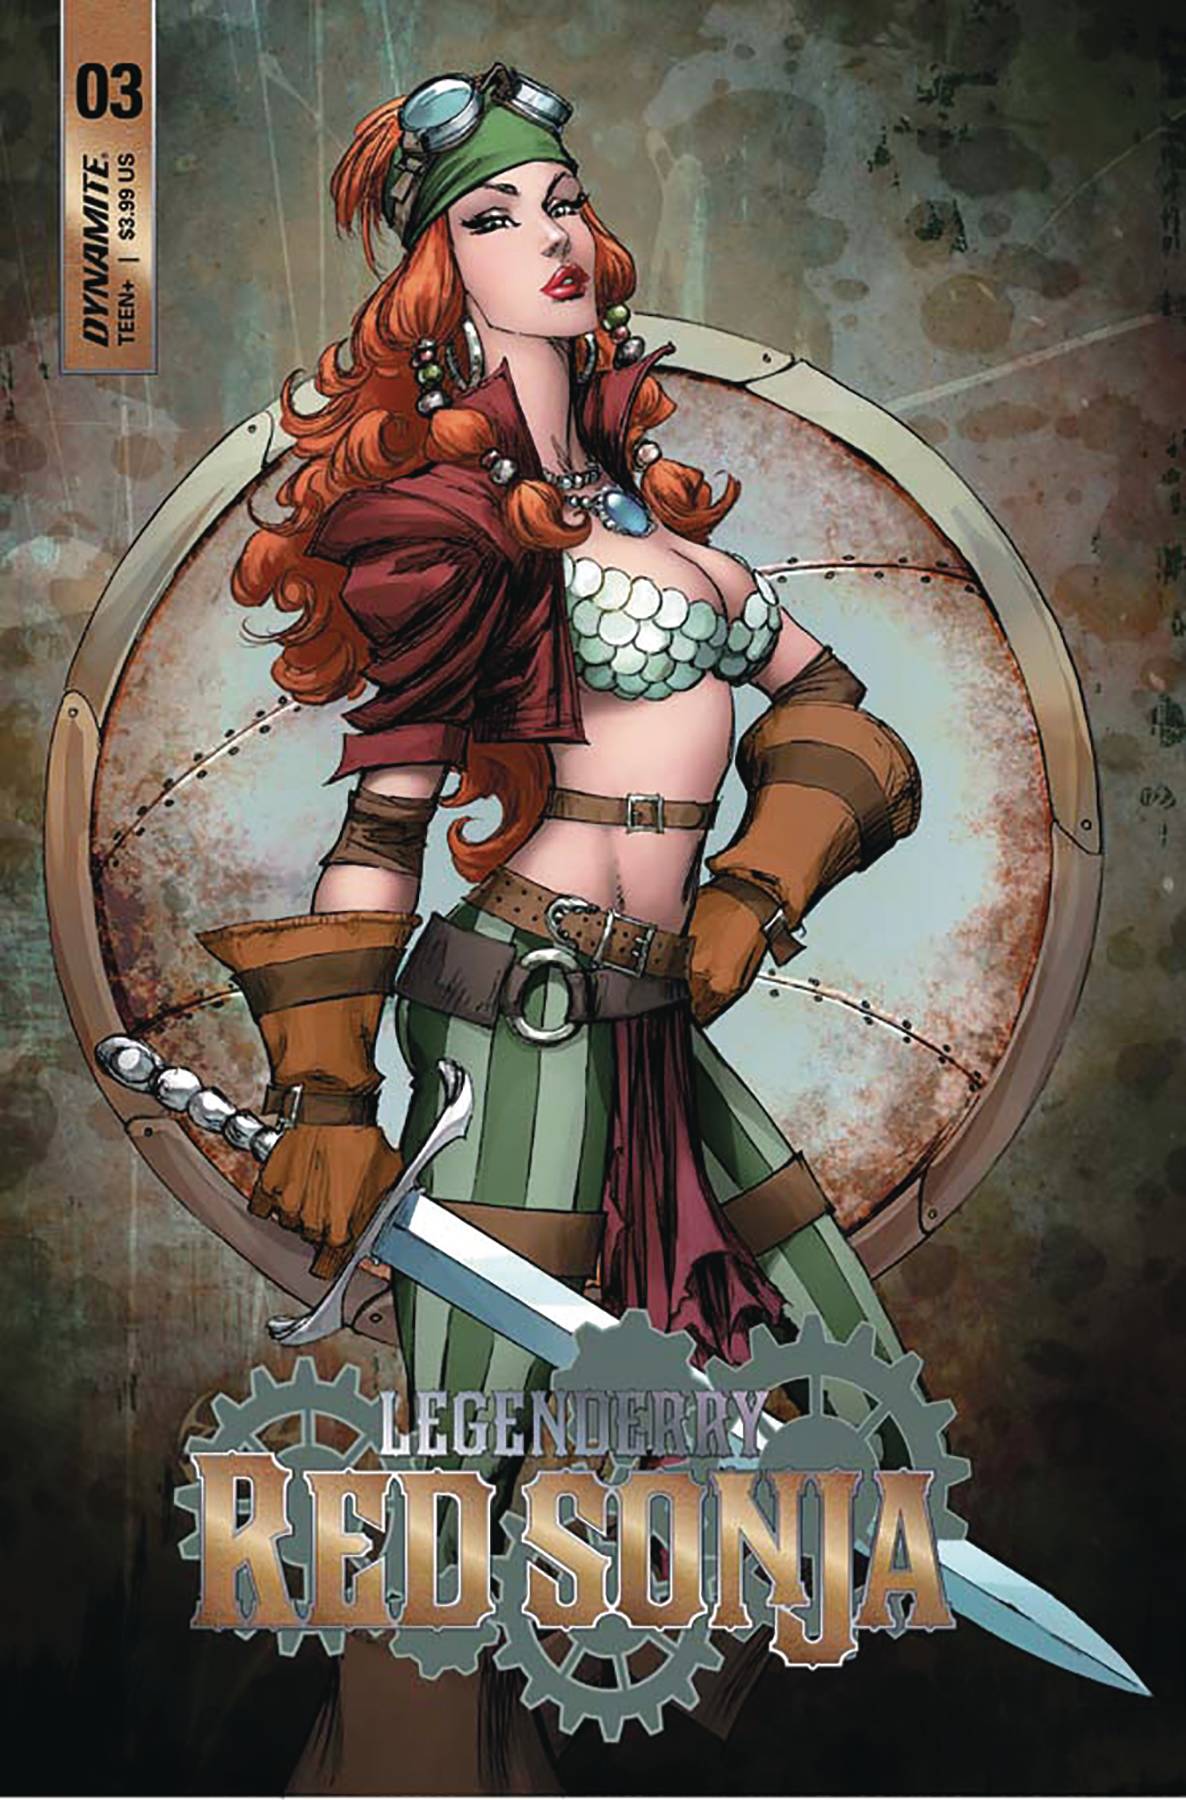 Legenderry Red Sonja #3 Cover A Benitez (Of 5)